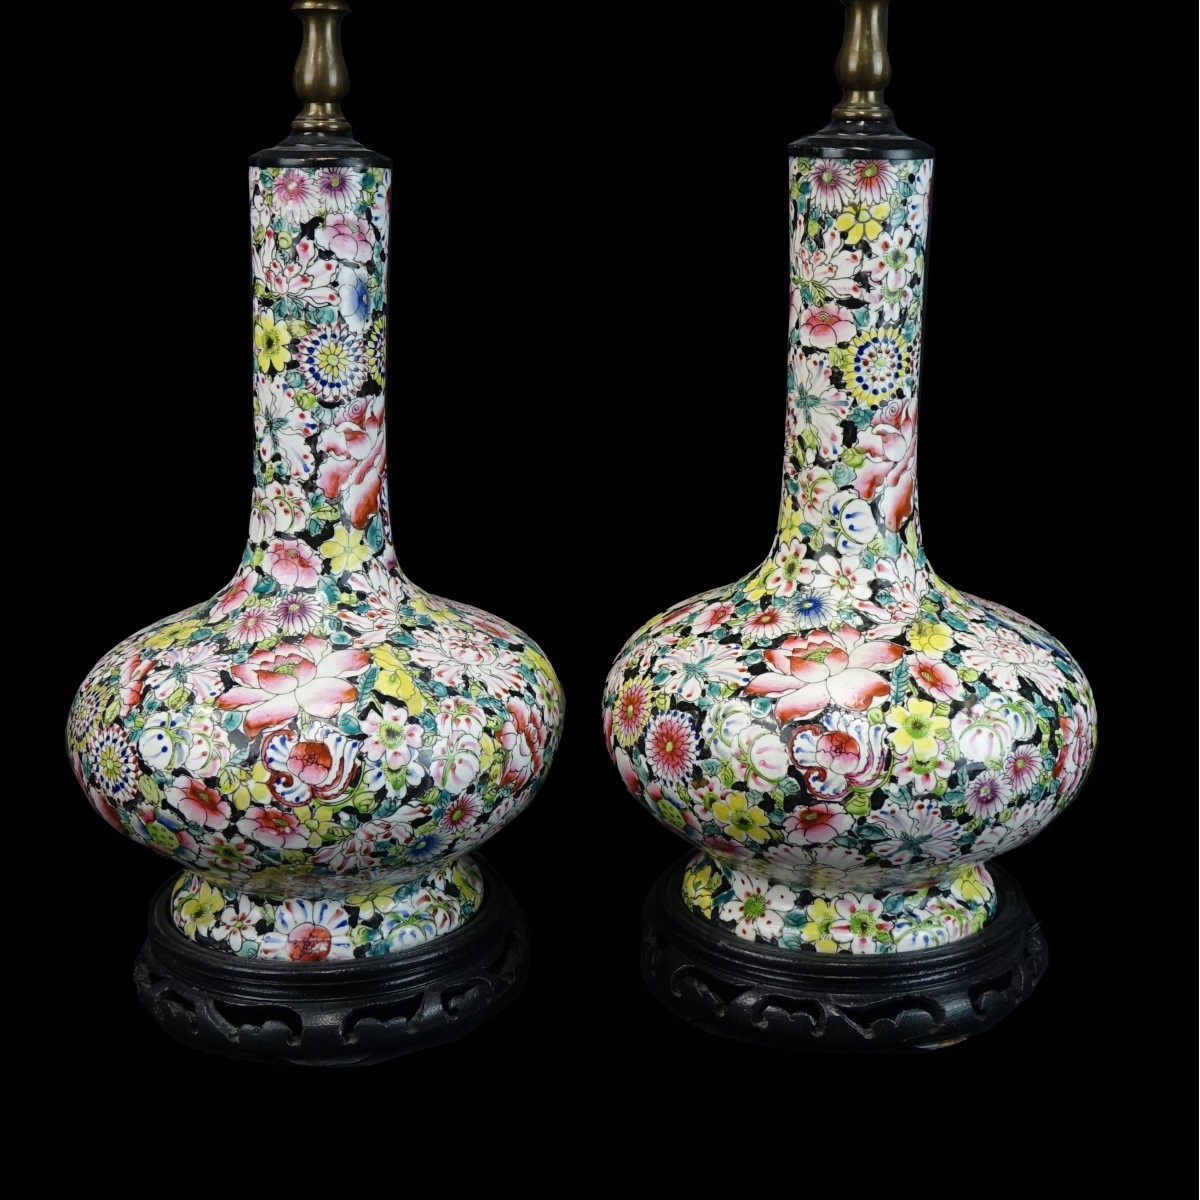 Pair of 20th C. Chinese Porcelain Lamps